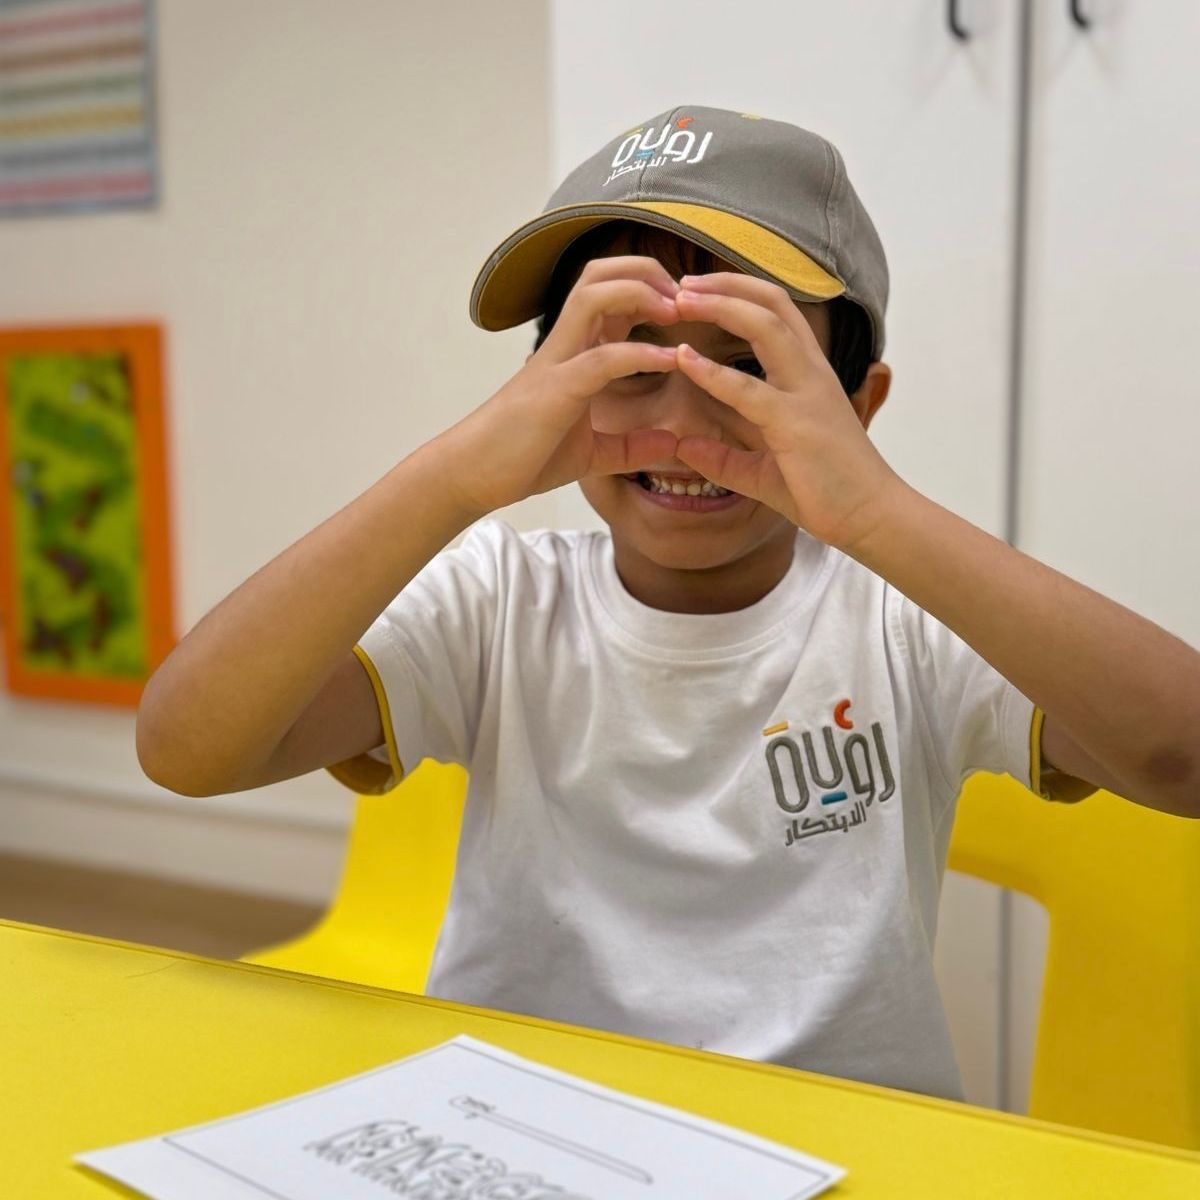 A young boy wearing a gray hat and a white shirt with the word oui on it